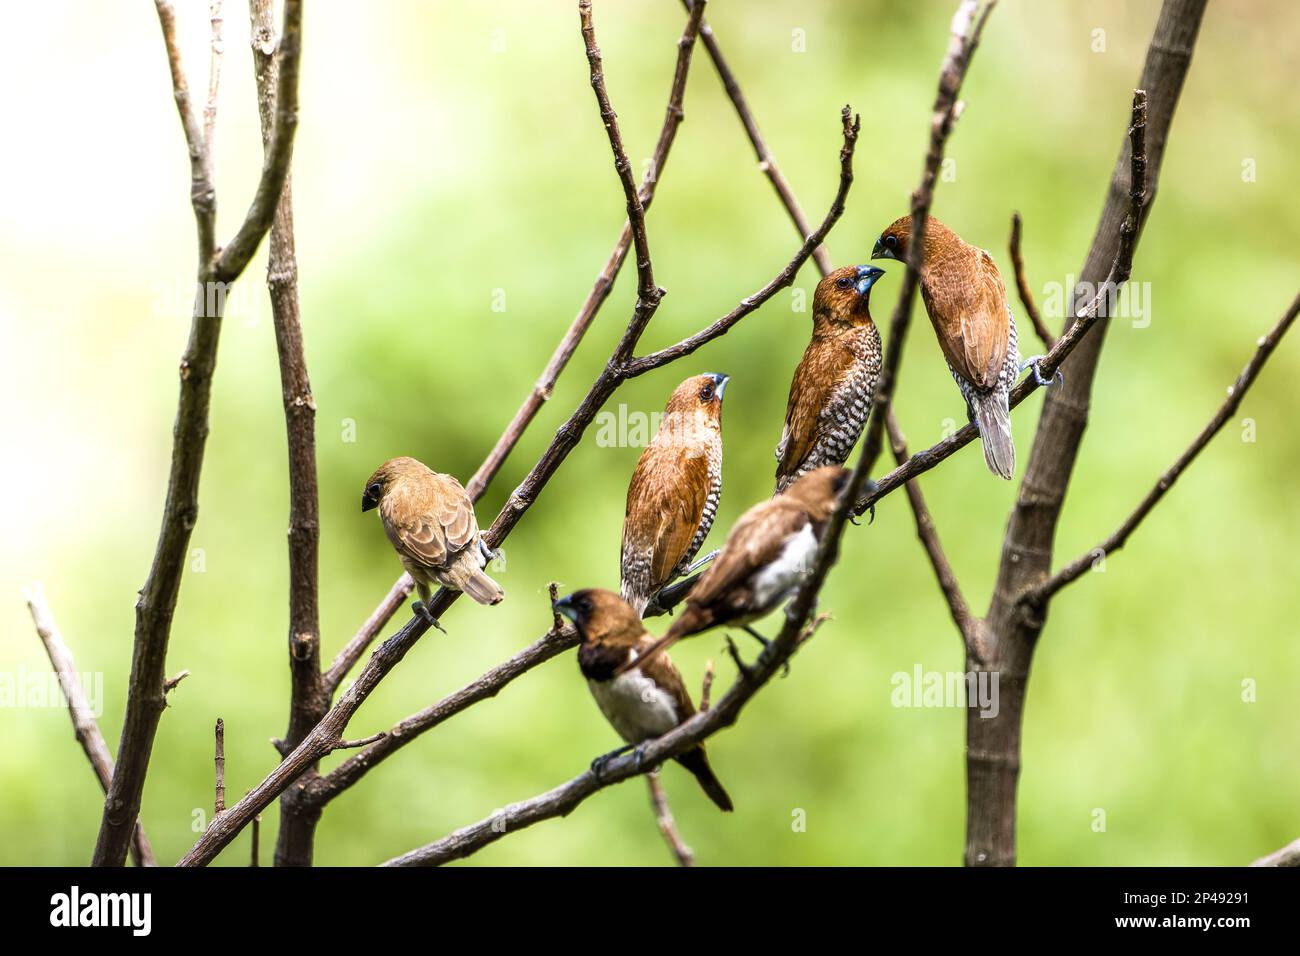 A group of birds of the type Estrildidae sparrow or estrildid finches perched on a bamboo branch in a sunny morning, a background of blurred green lea Stock Photo